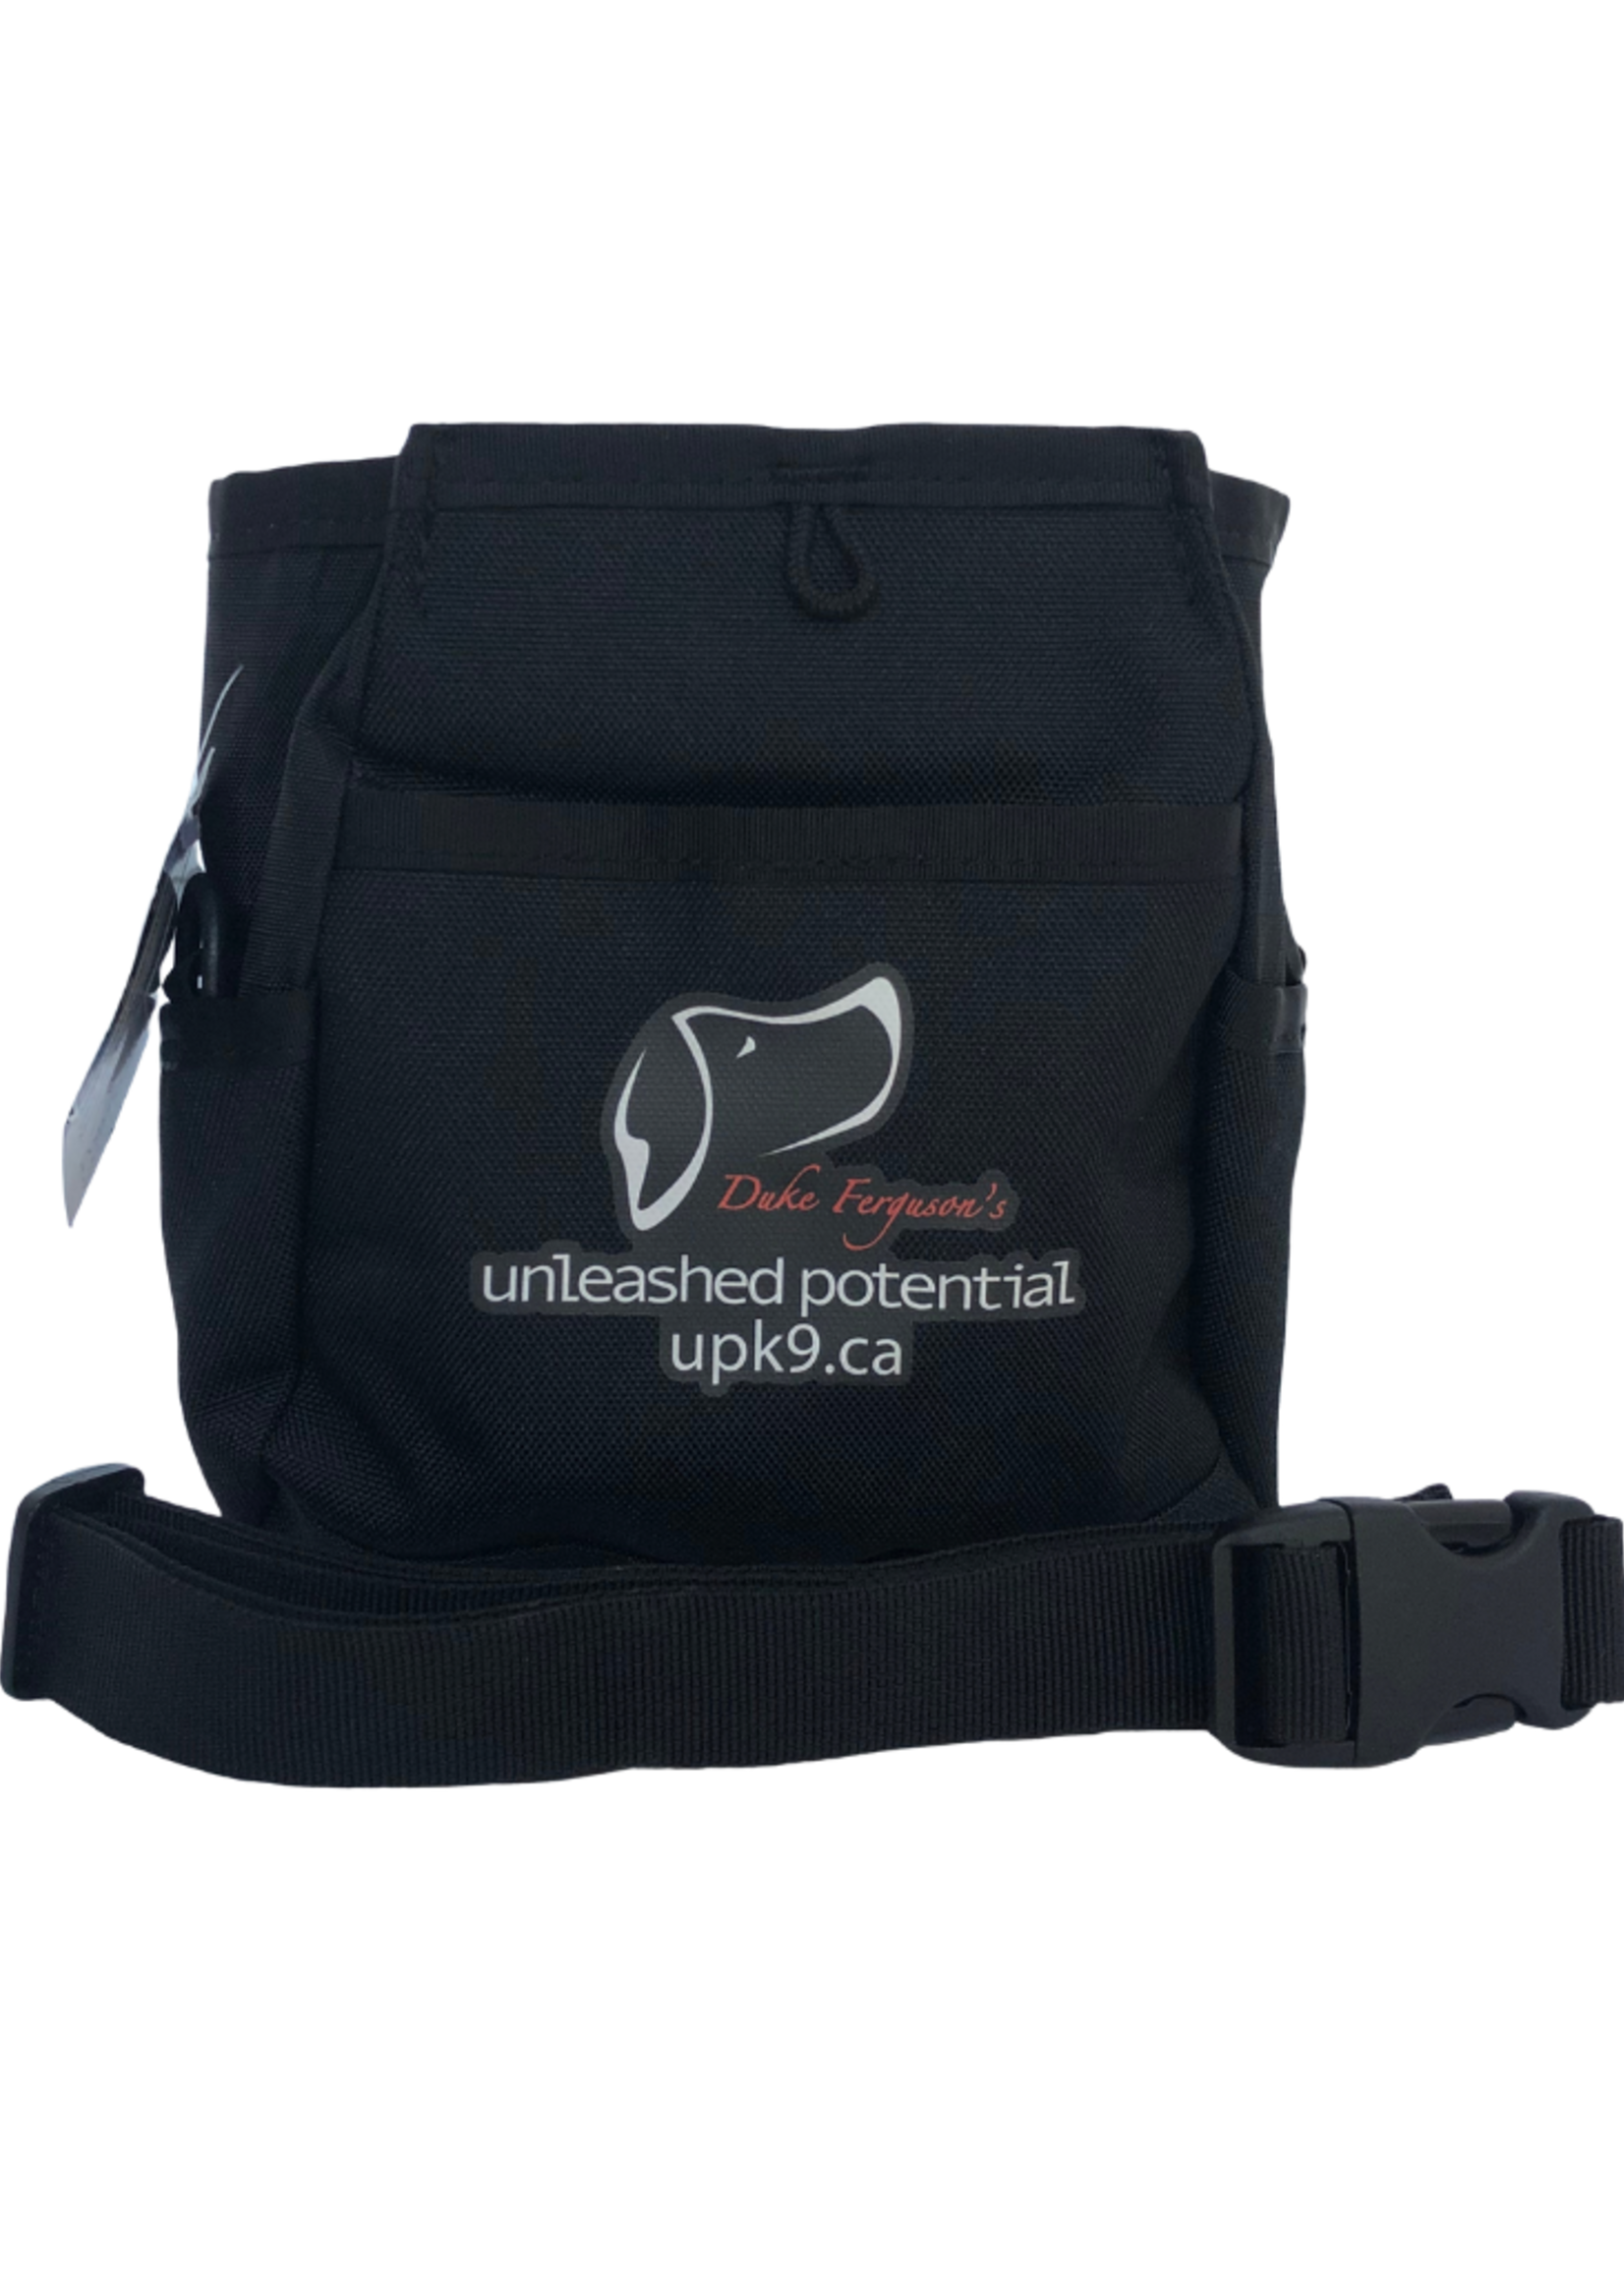 UPK9 Training Pouch and Strap